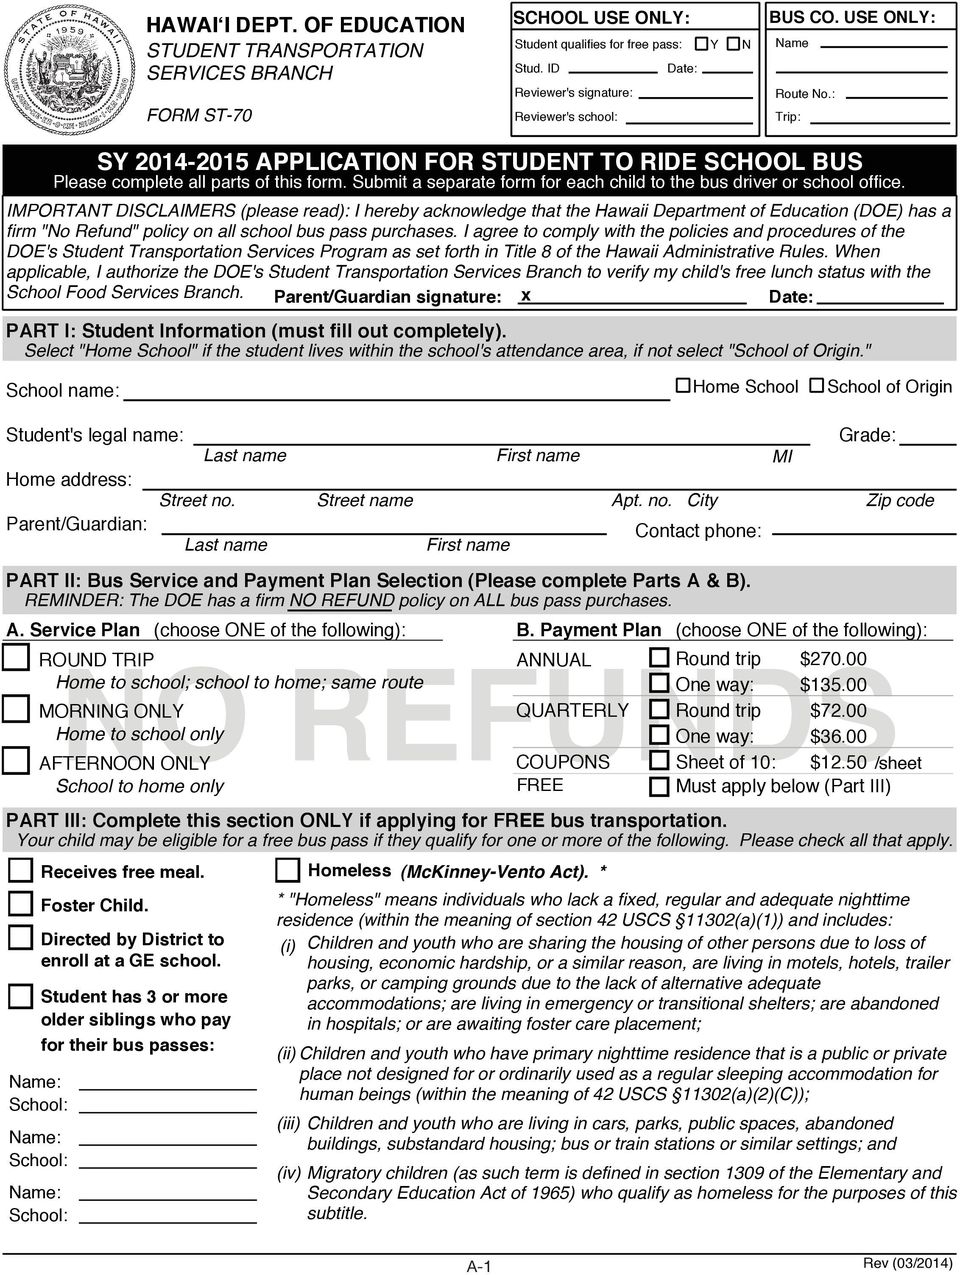 Submit a separate form for each child to the bus driver or school office.